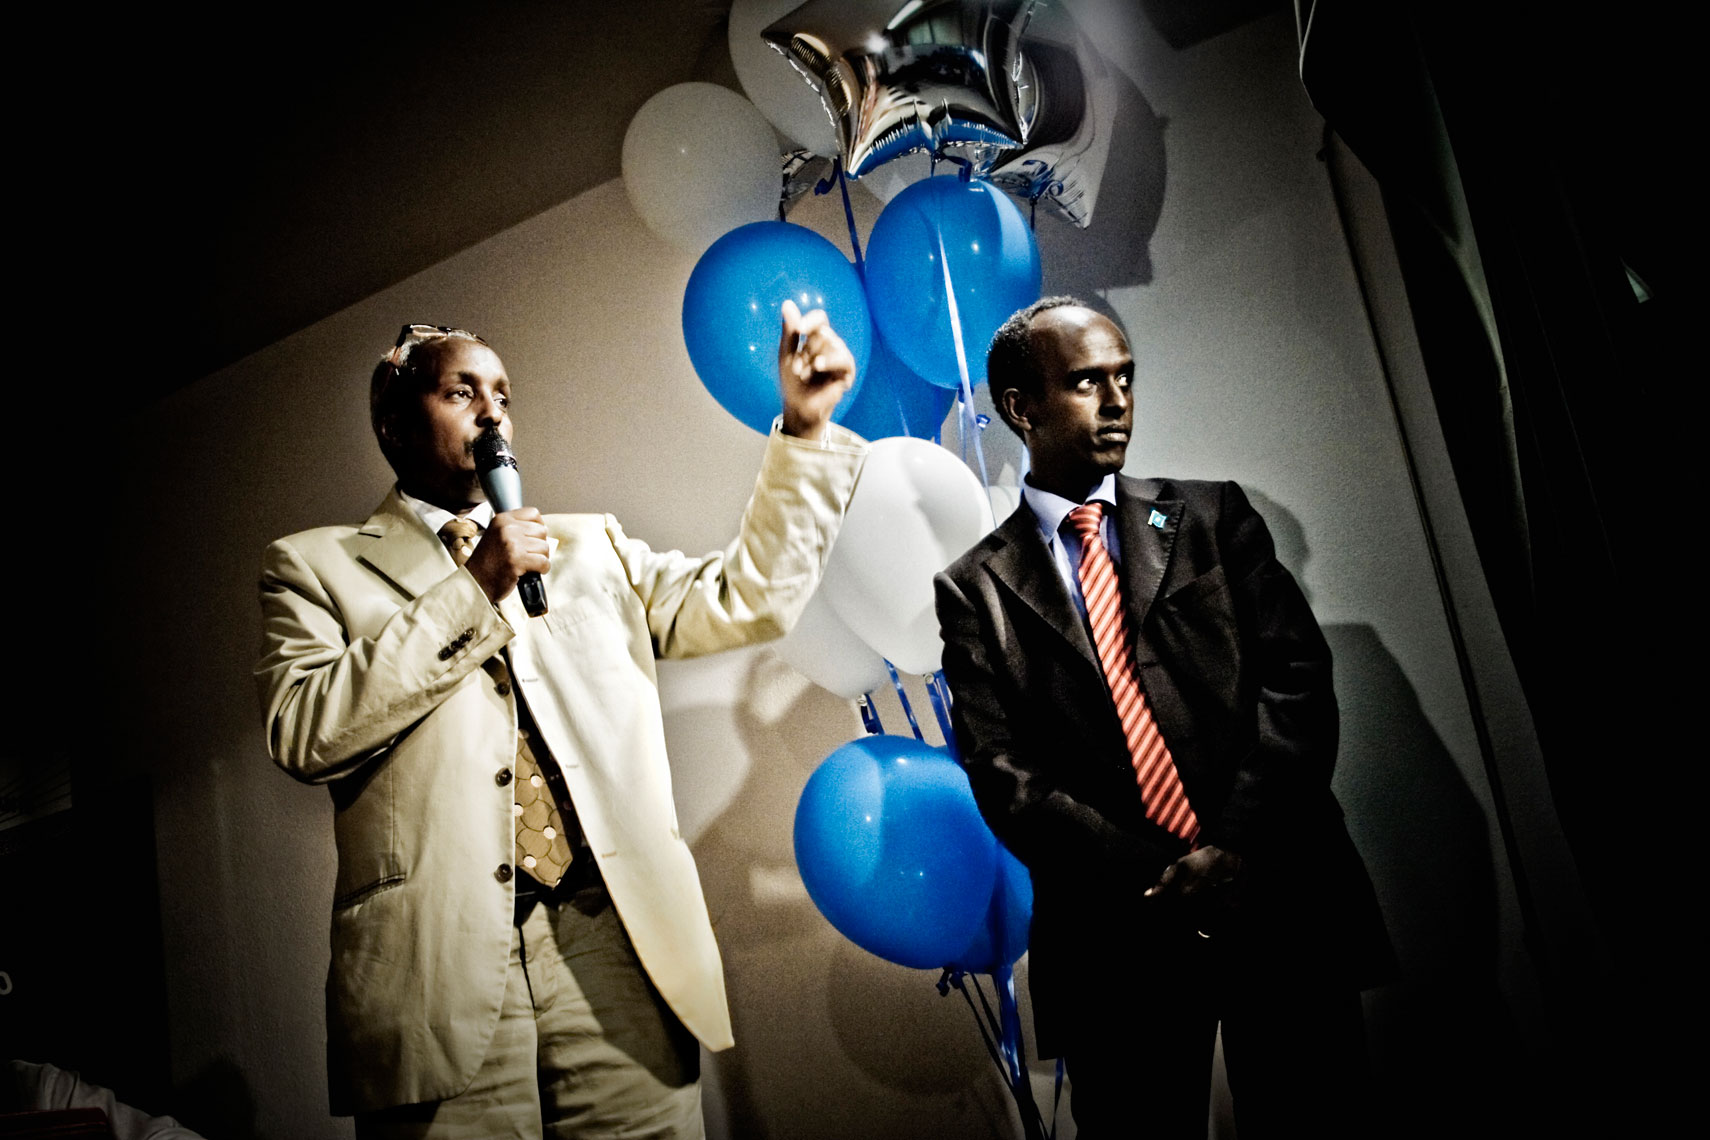 ITALY. Florence, 4th July 2010. A speech during celebrations for the 50th anniversary of the Somalia Independence Day (1st July 1960).